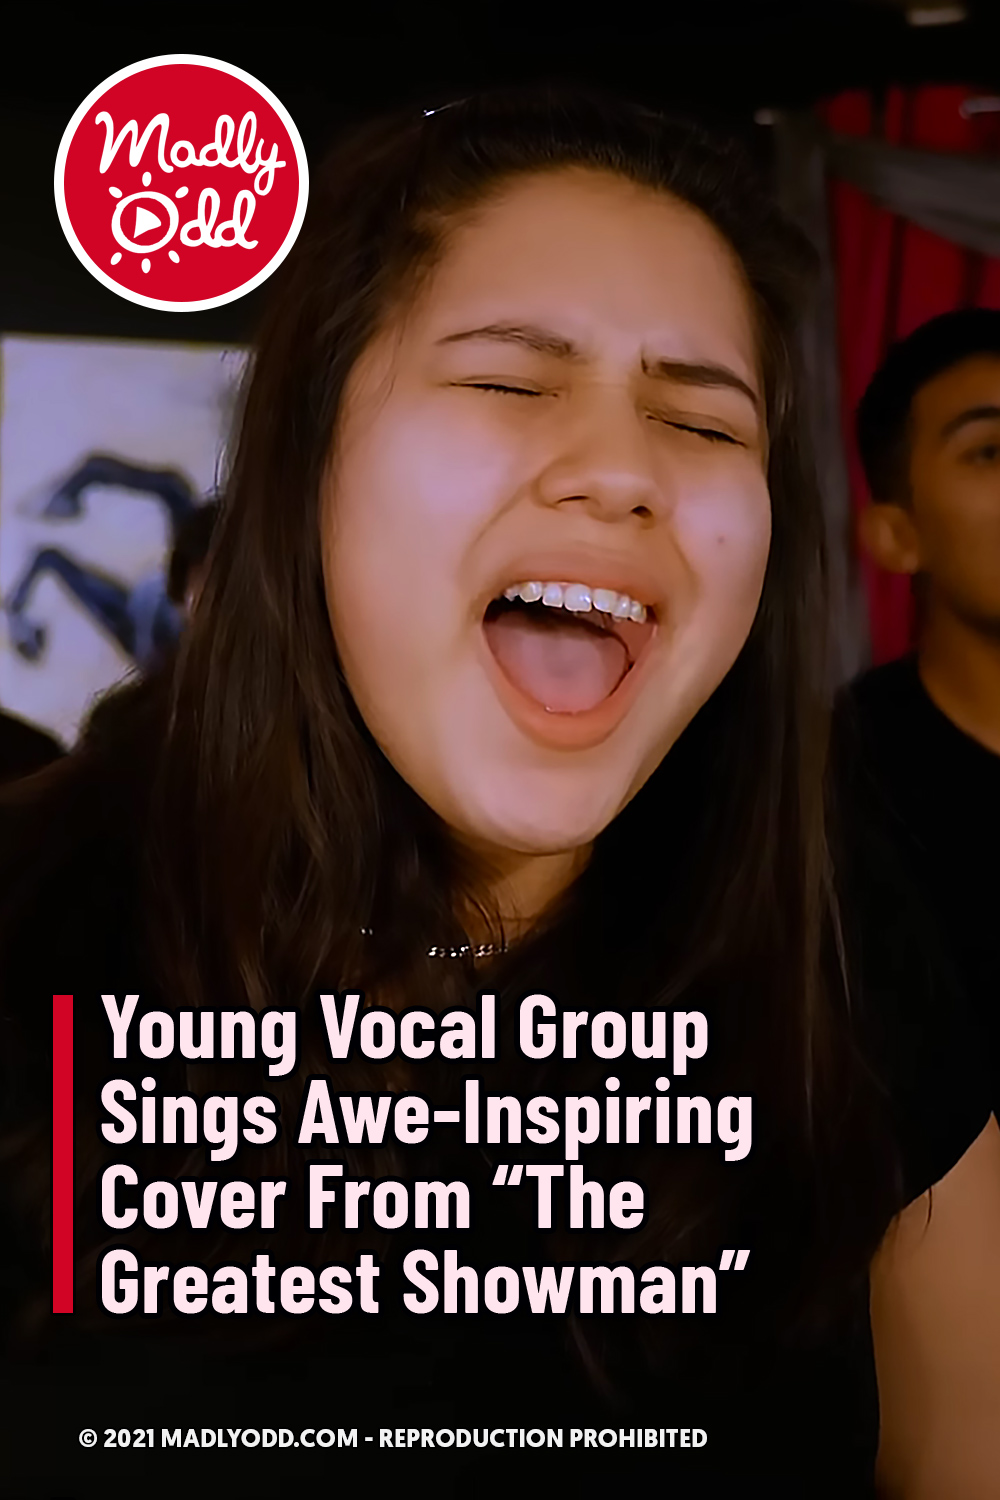 Young Vocal Group Sings Awe-Inspiring Cover From “The Greatest Showman”